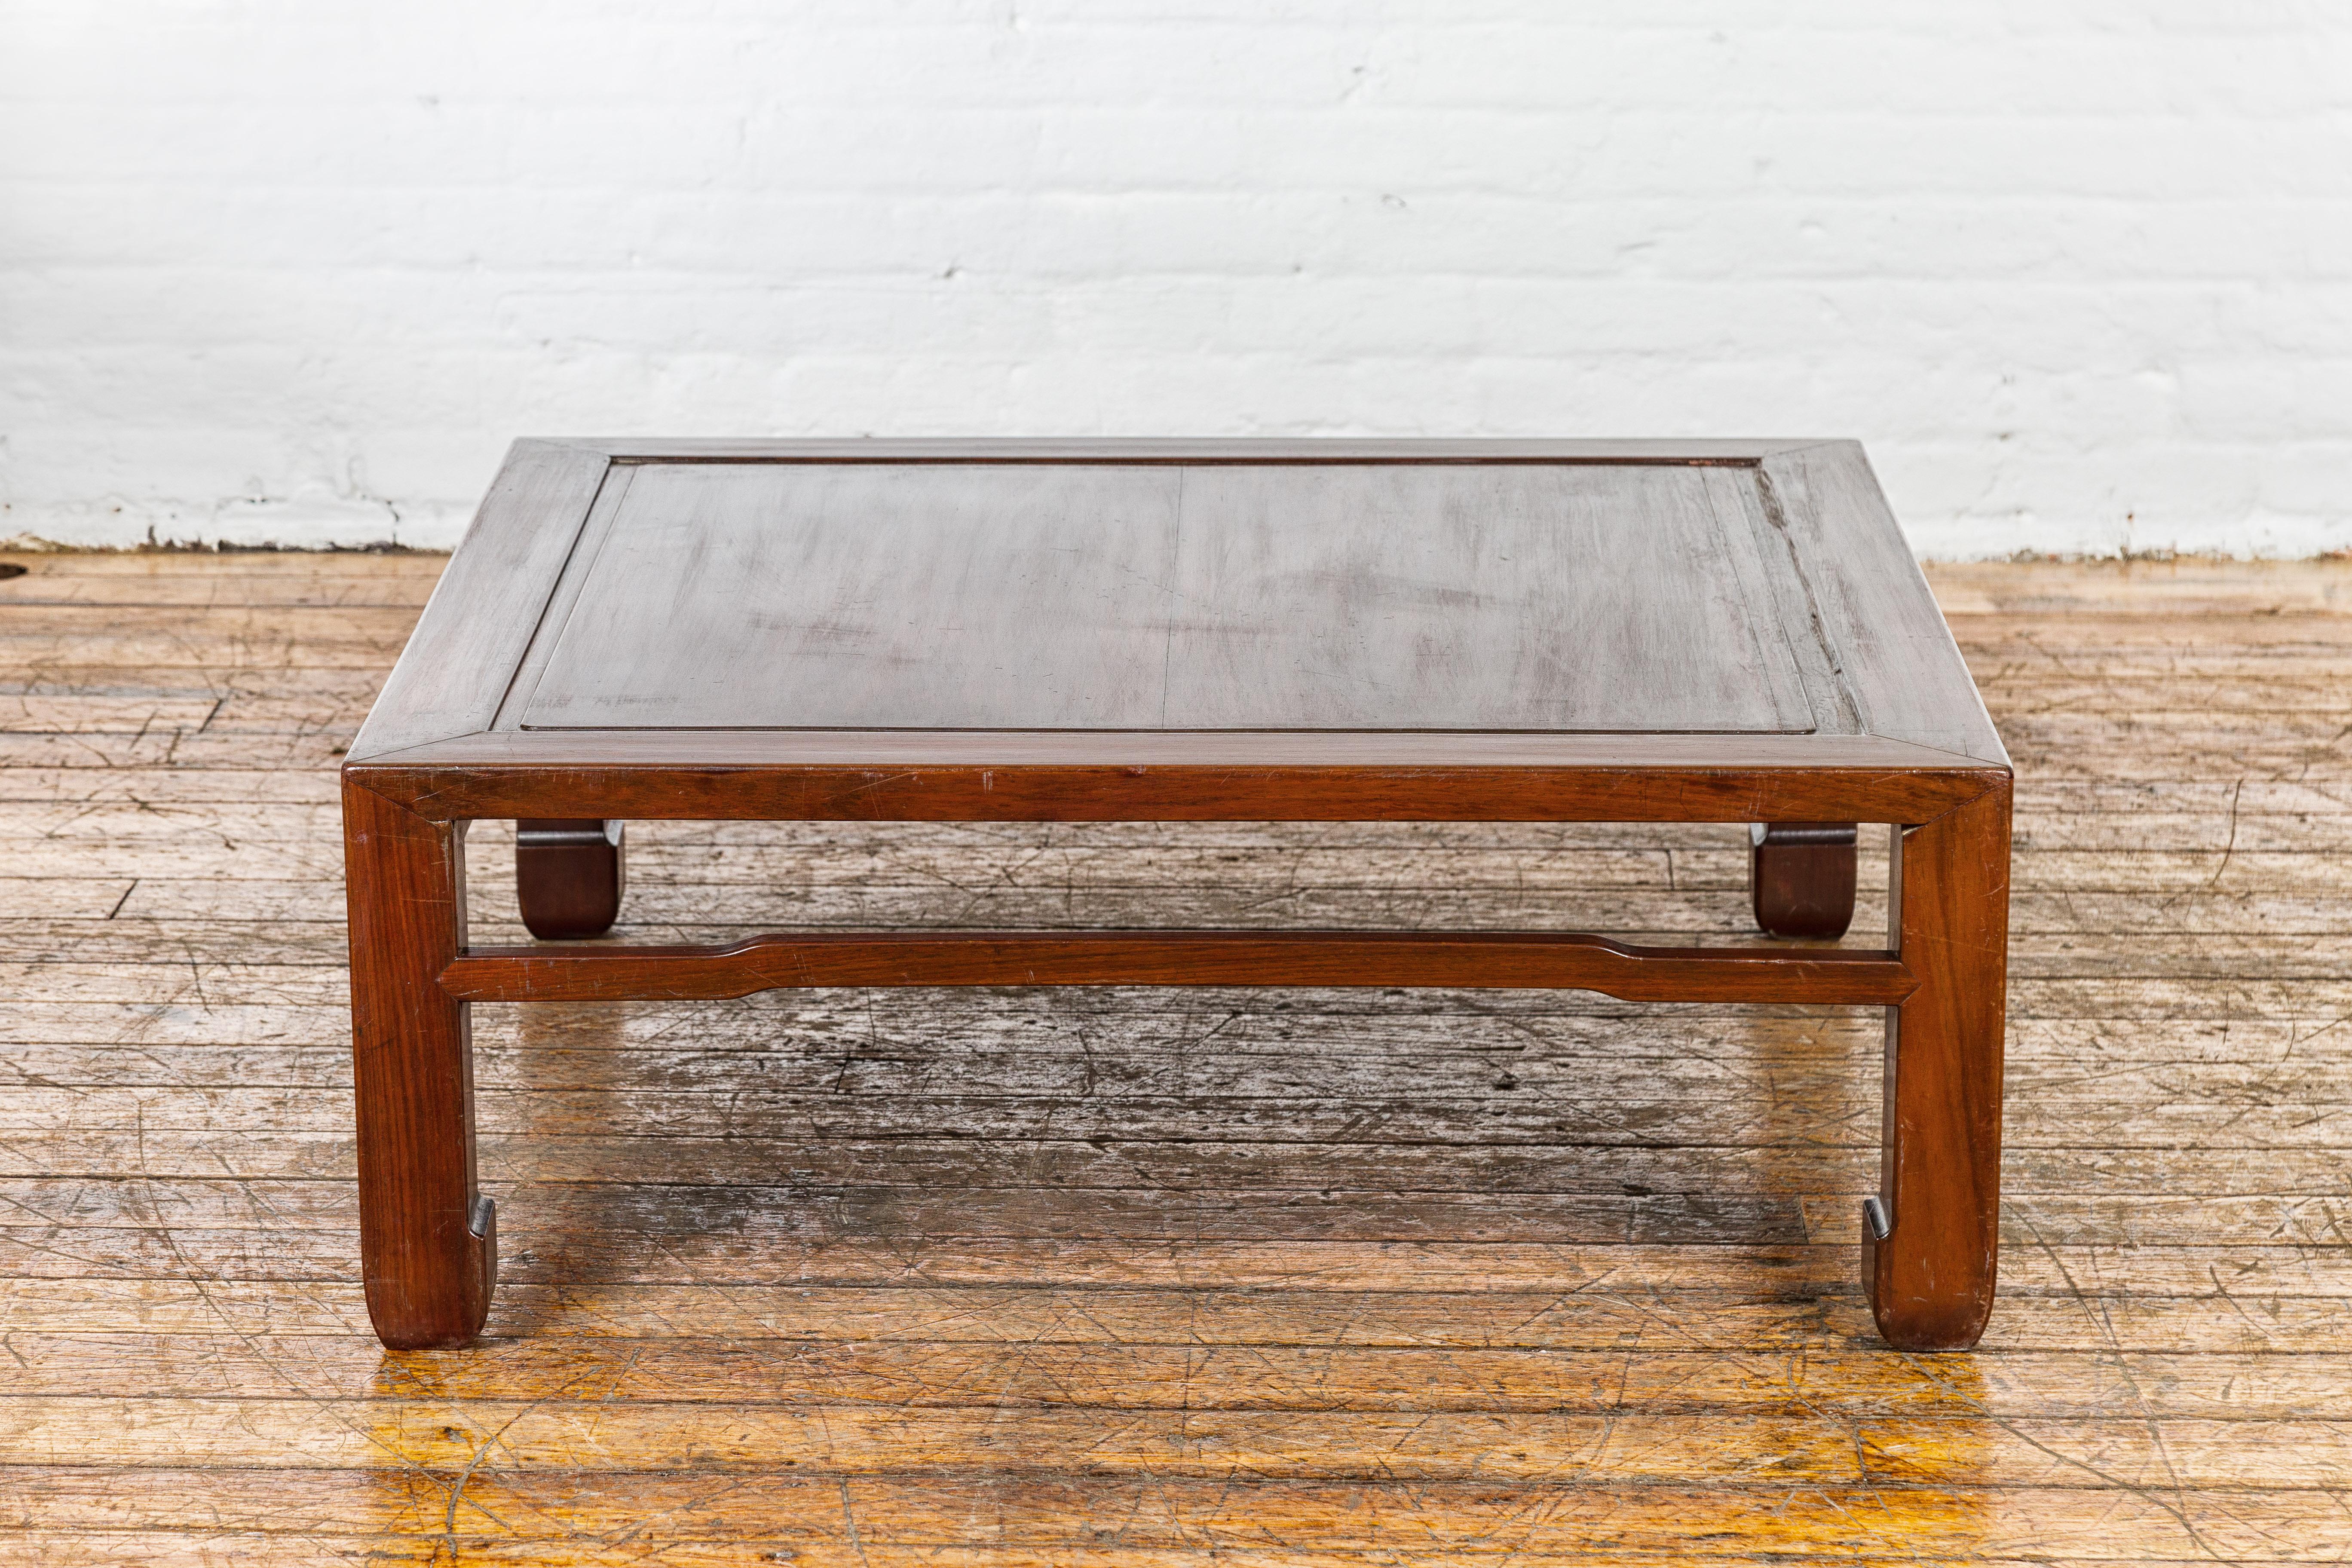 Late Qing Dynasty Square Coffee Table with Horse Hoof Legs and Stretchers In Good Condition For Sale In Yonkers, NY